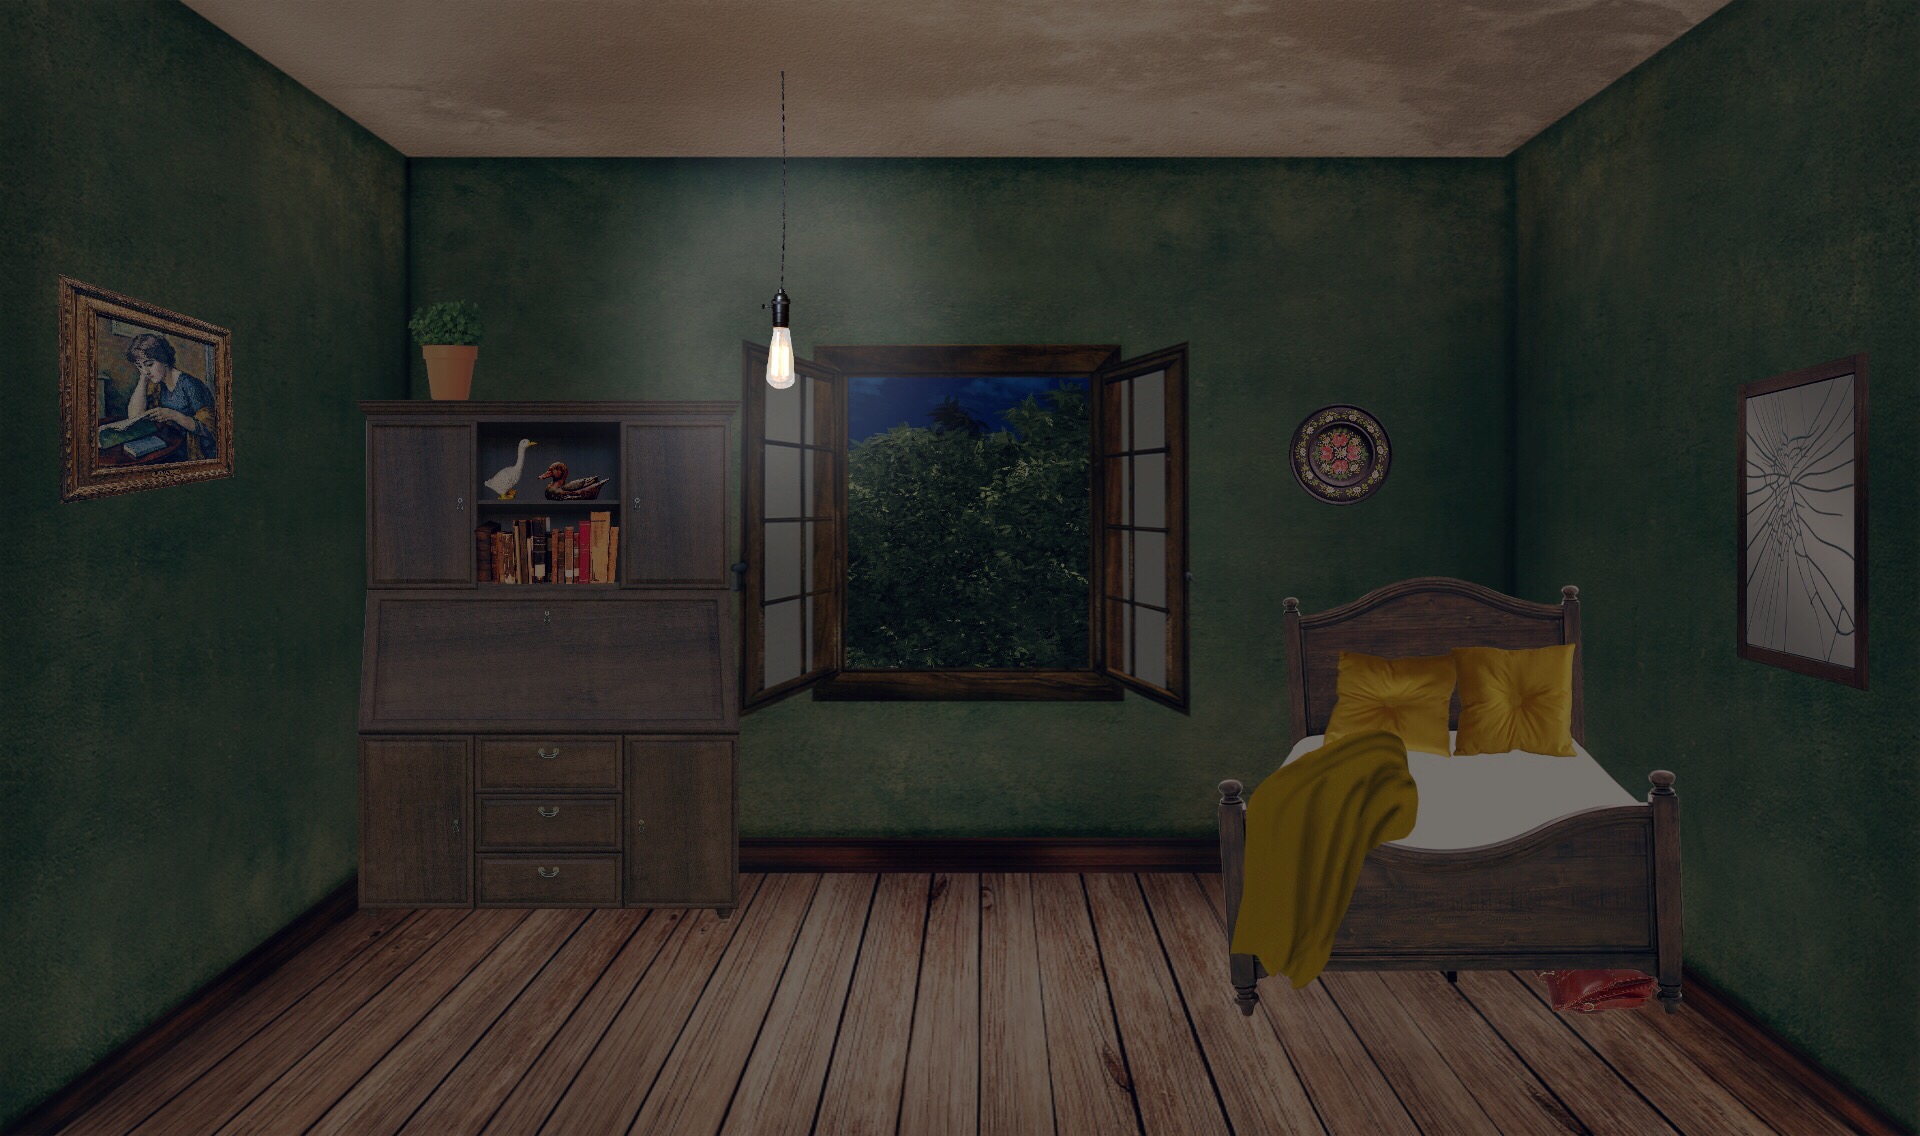 INT. HOME ALONE BEDROOM YELLOW 2 – NIGHT